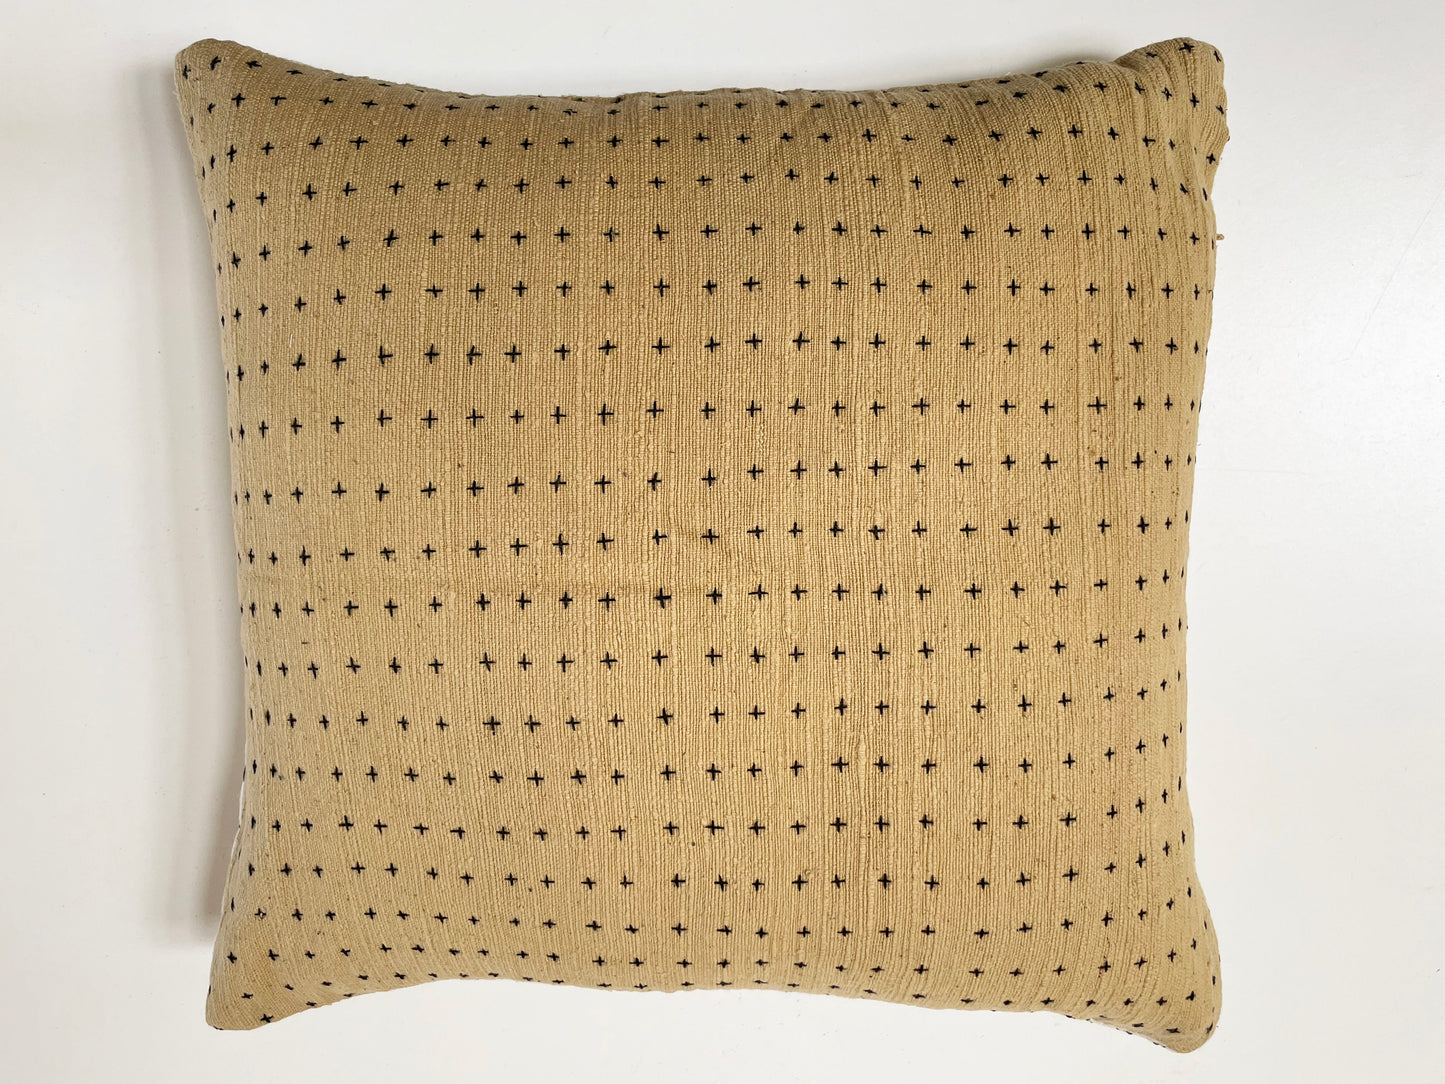 Mustard Stitched Pillow Cover 18x18in